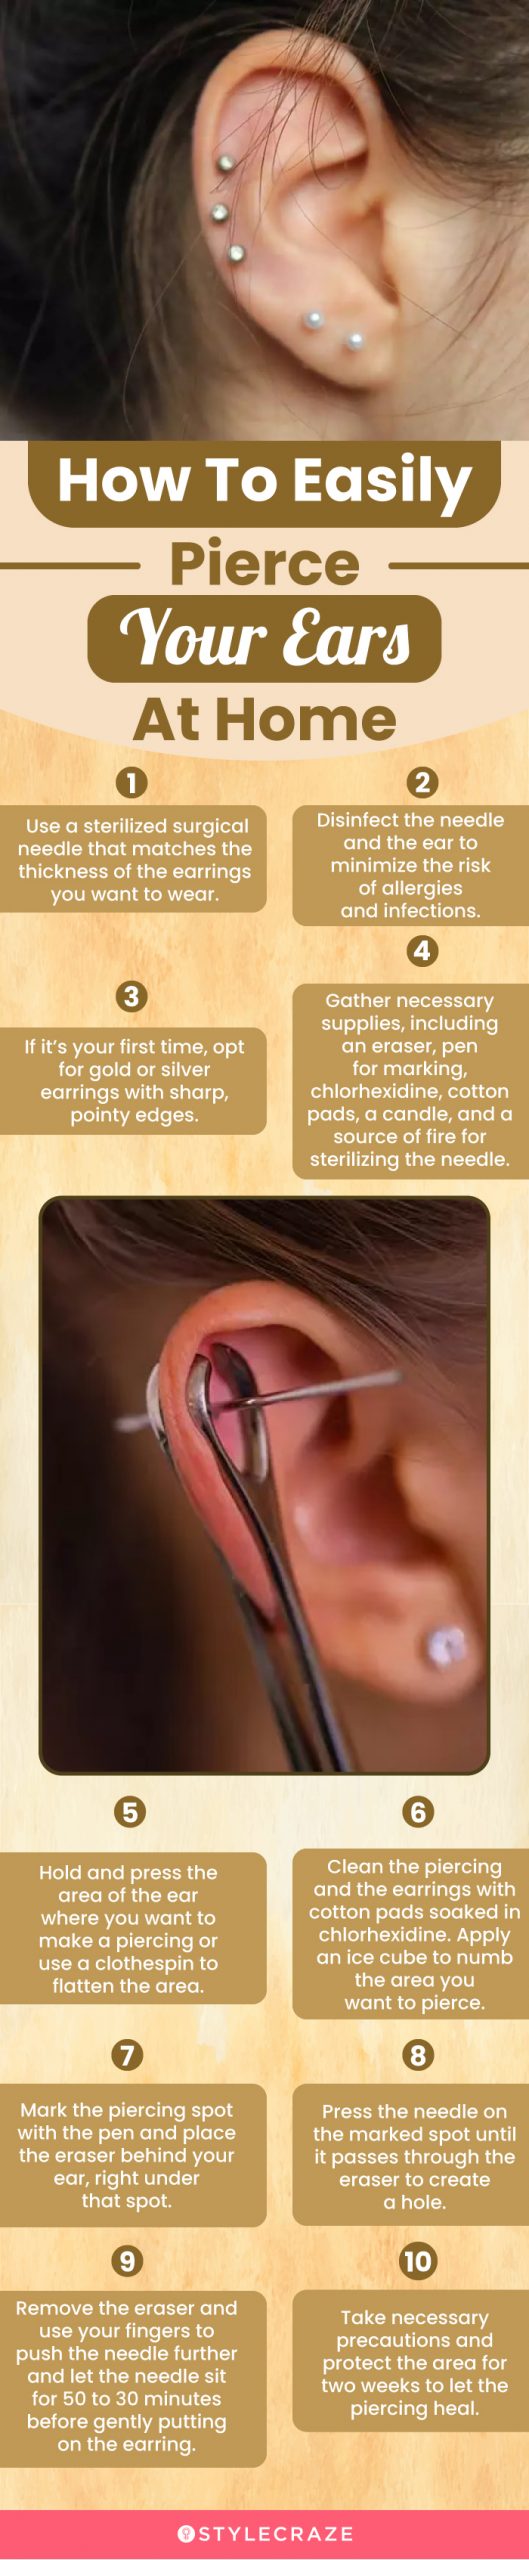 how to easily pierce your ears at home (infographic)